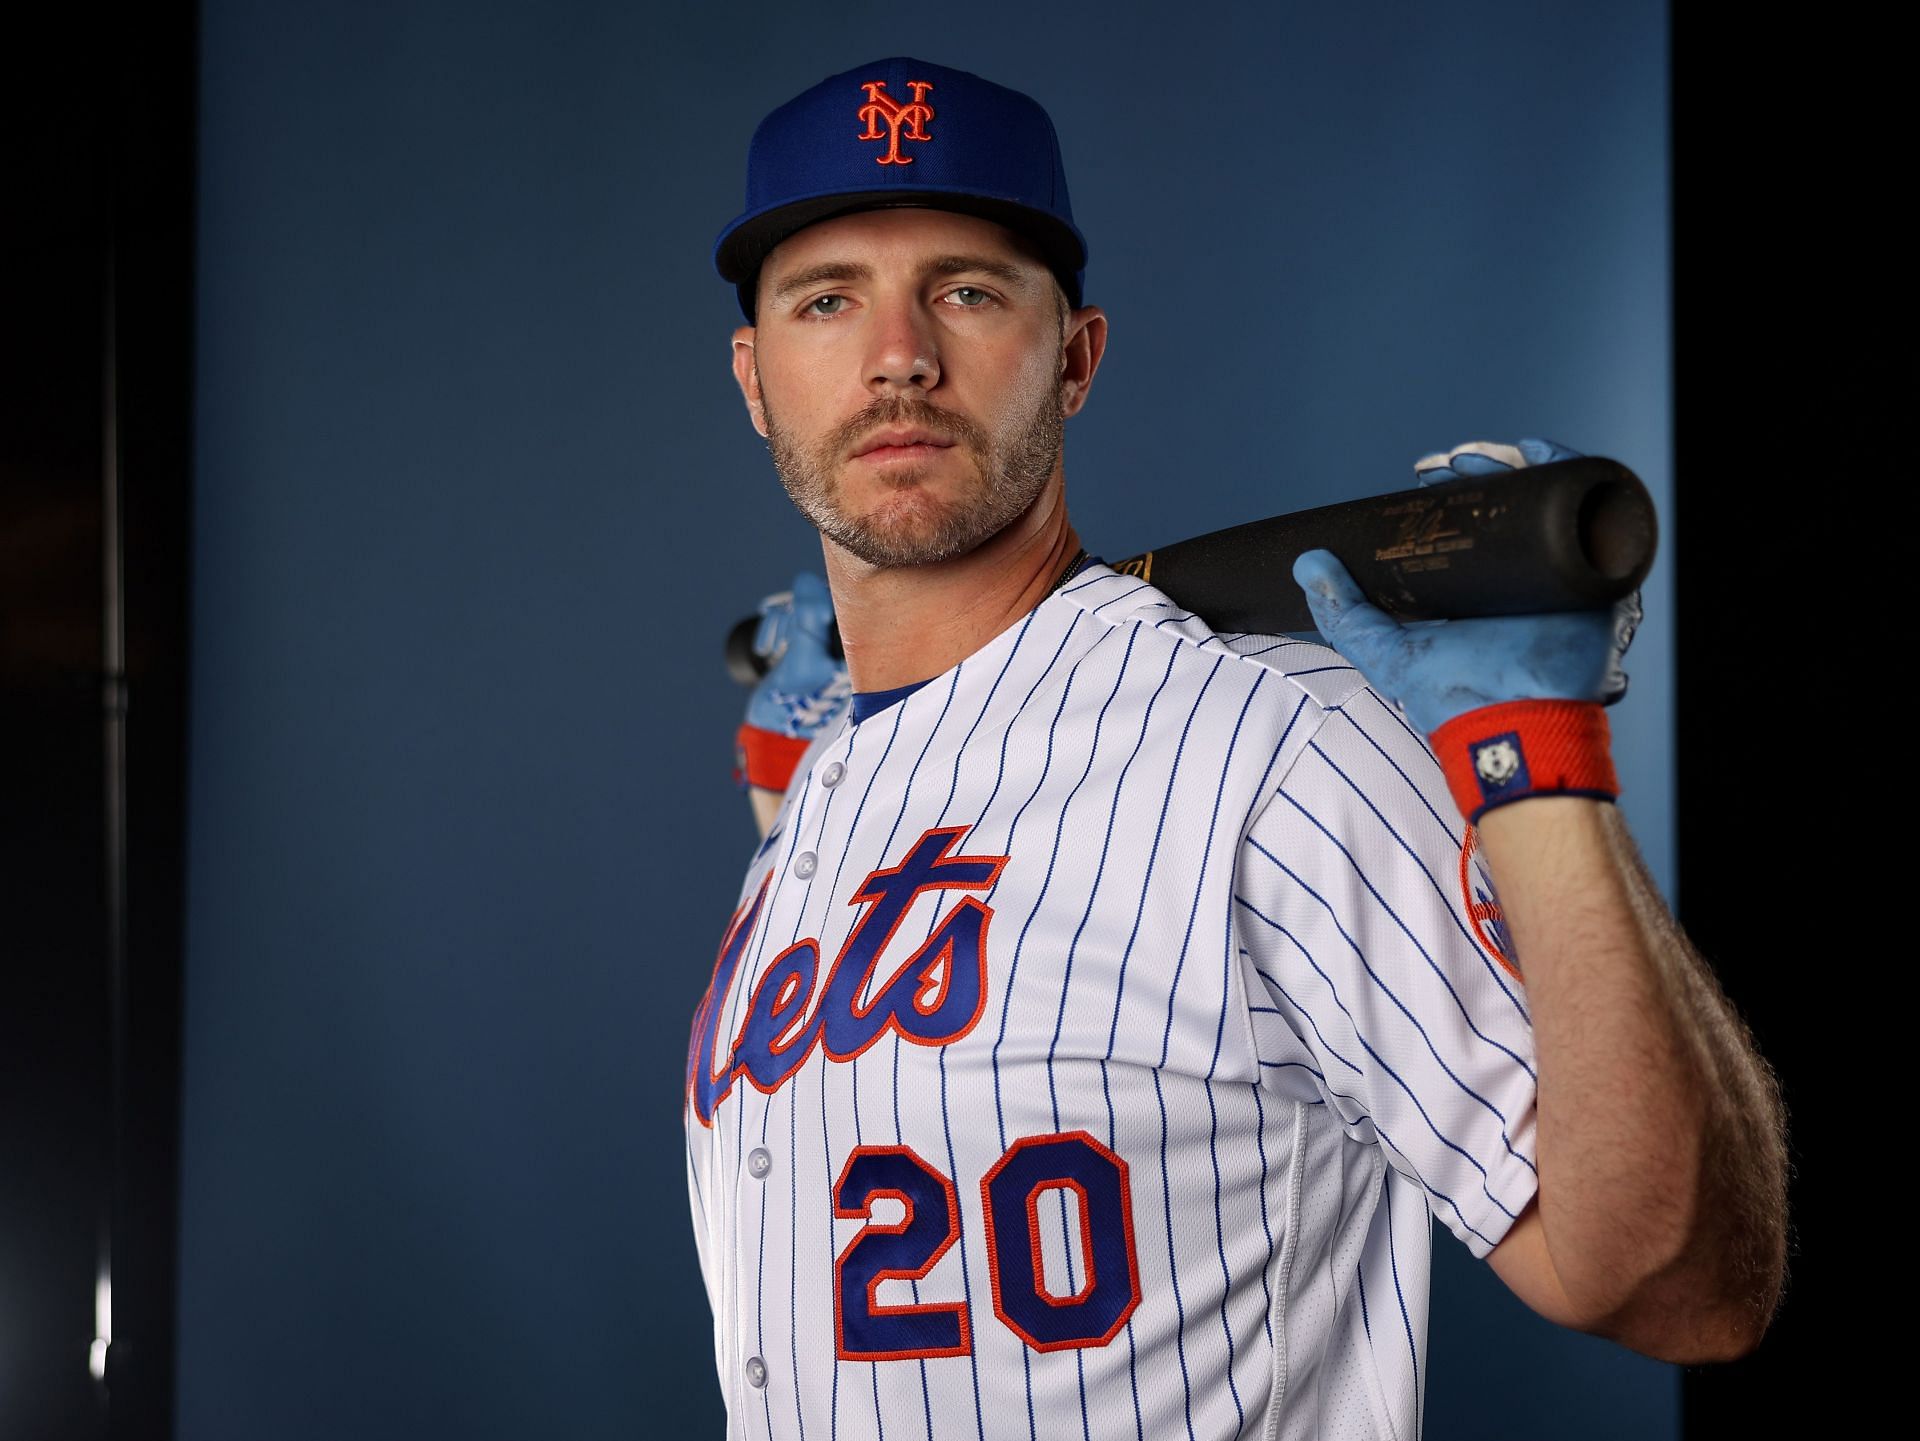 New York Mets: Pete Alonso's mic'd up by ESPN, big personality on